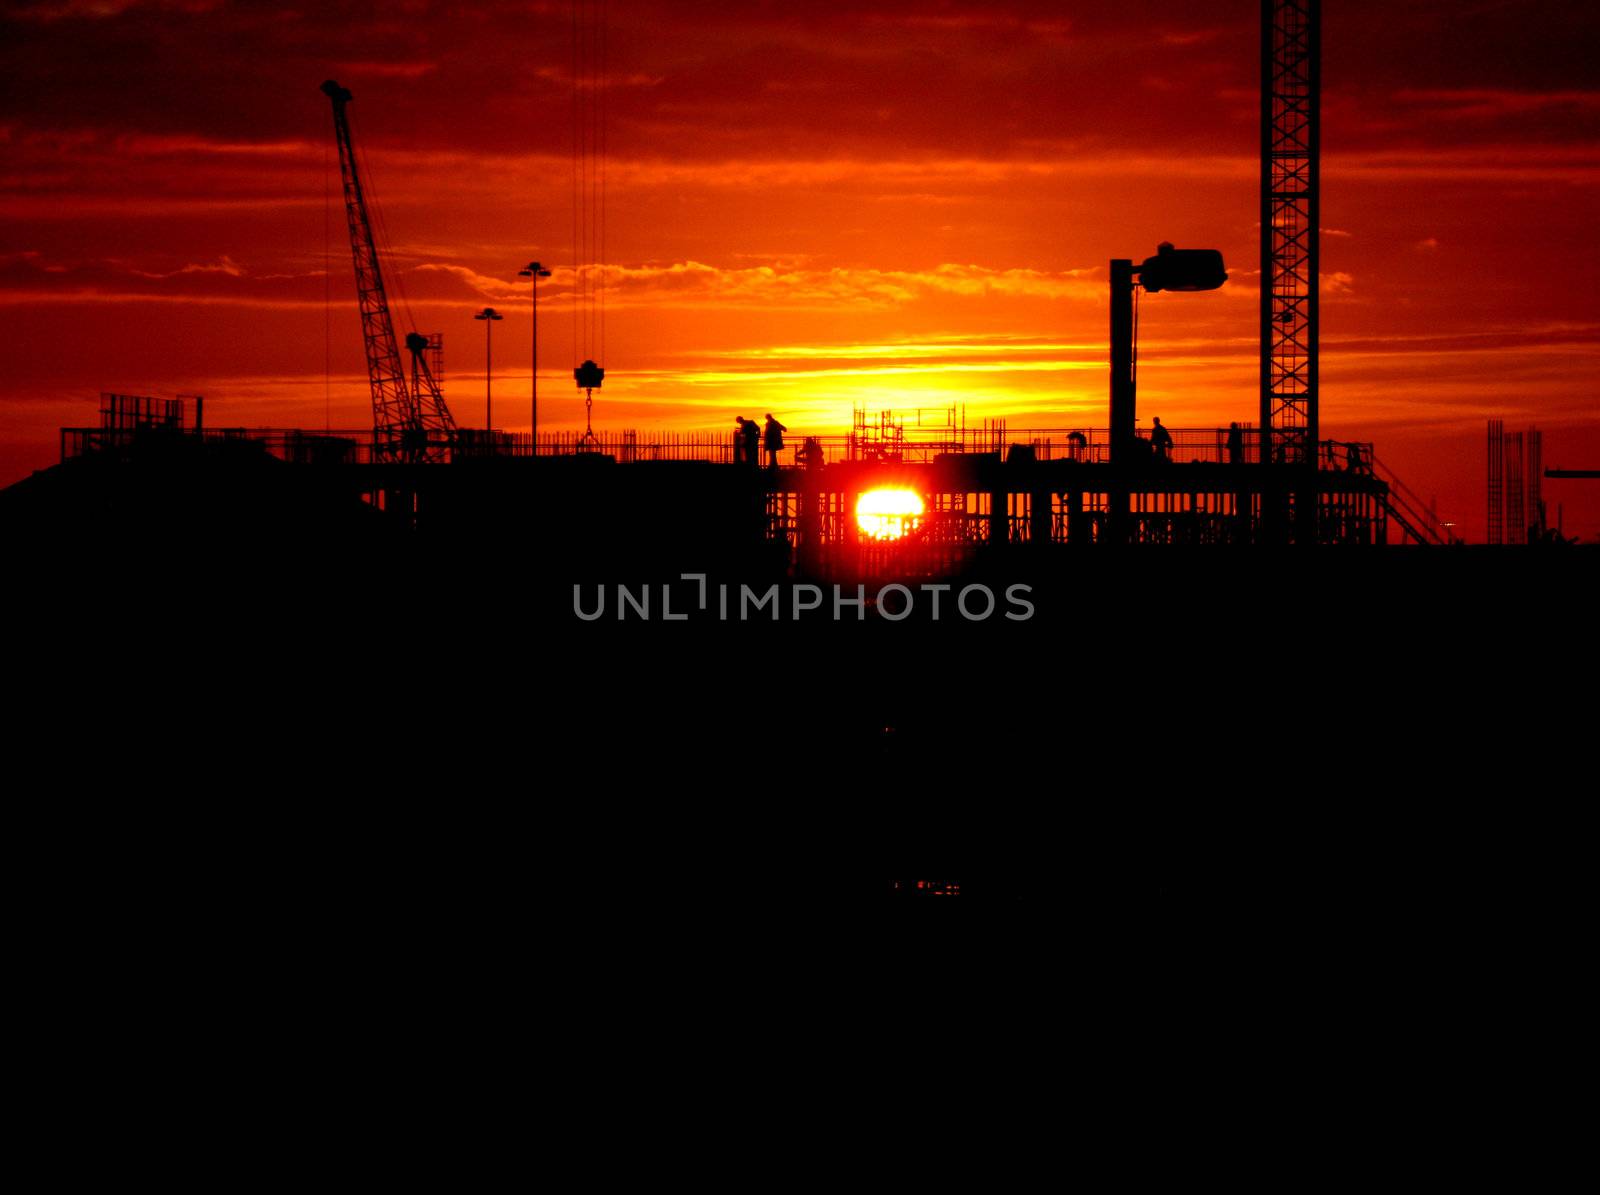 Construction silhouette by tommroch